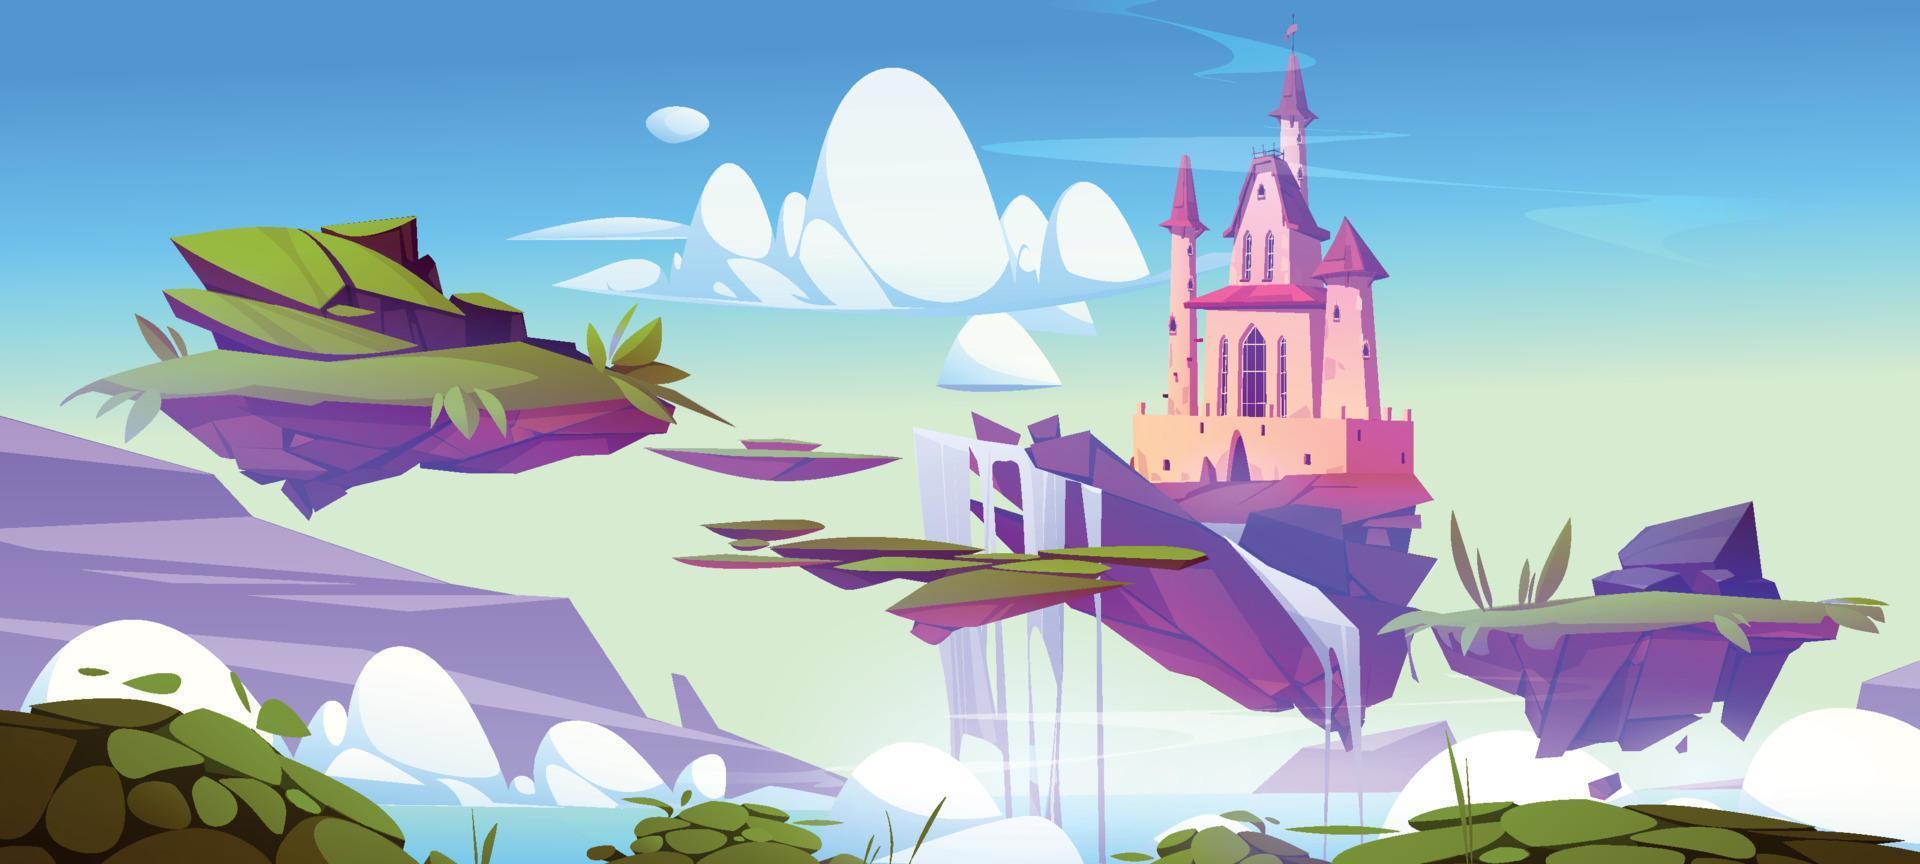 Summer landscape with castle and floating islands vector